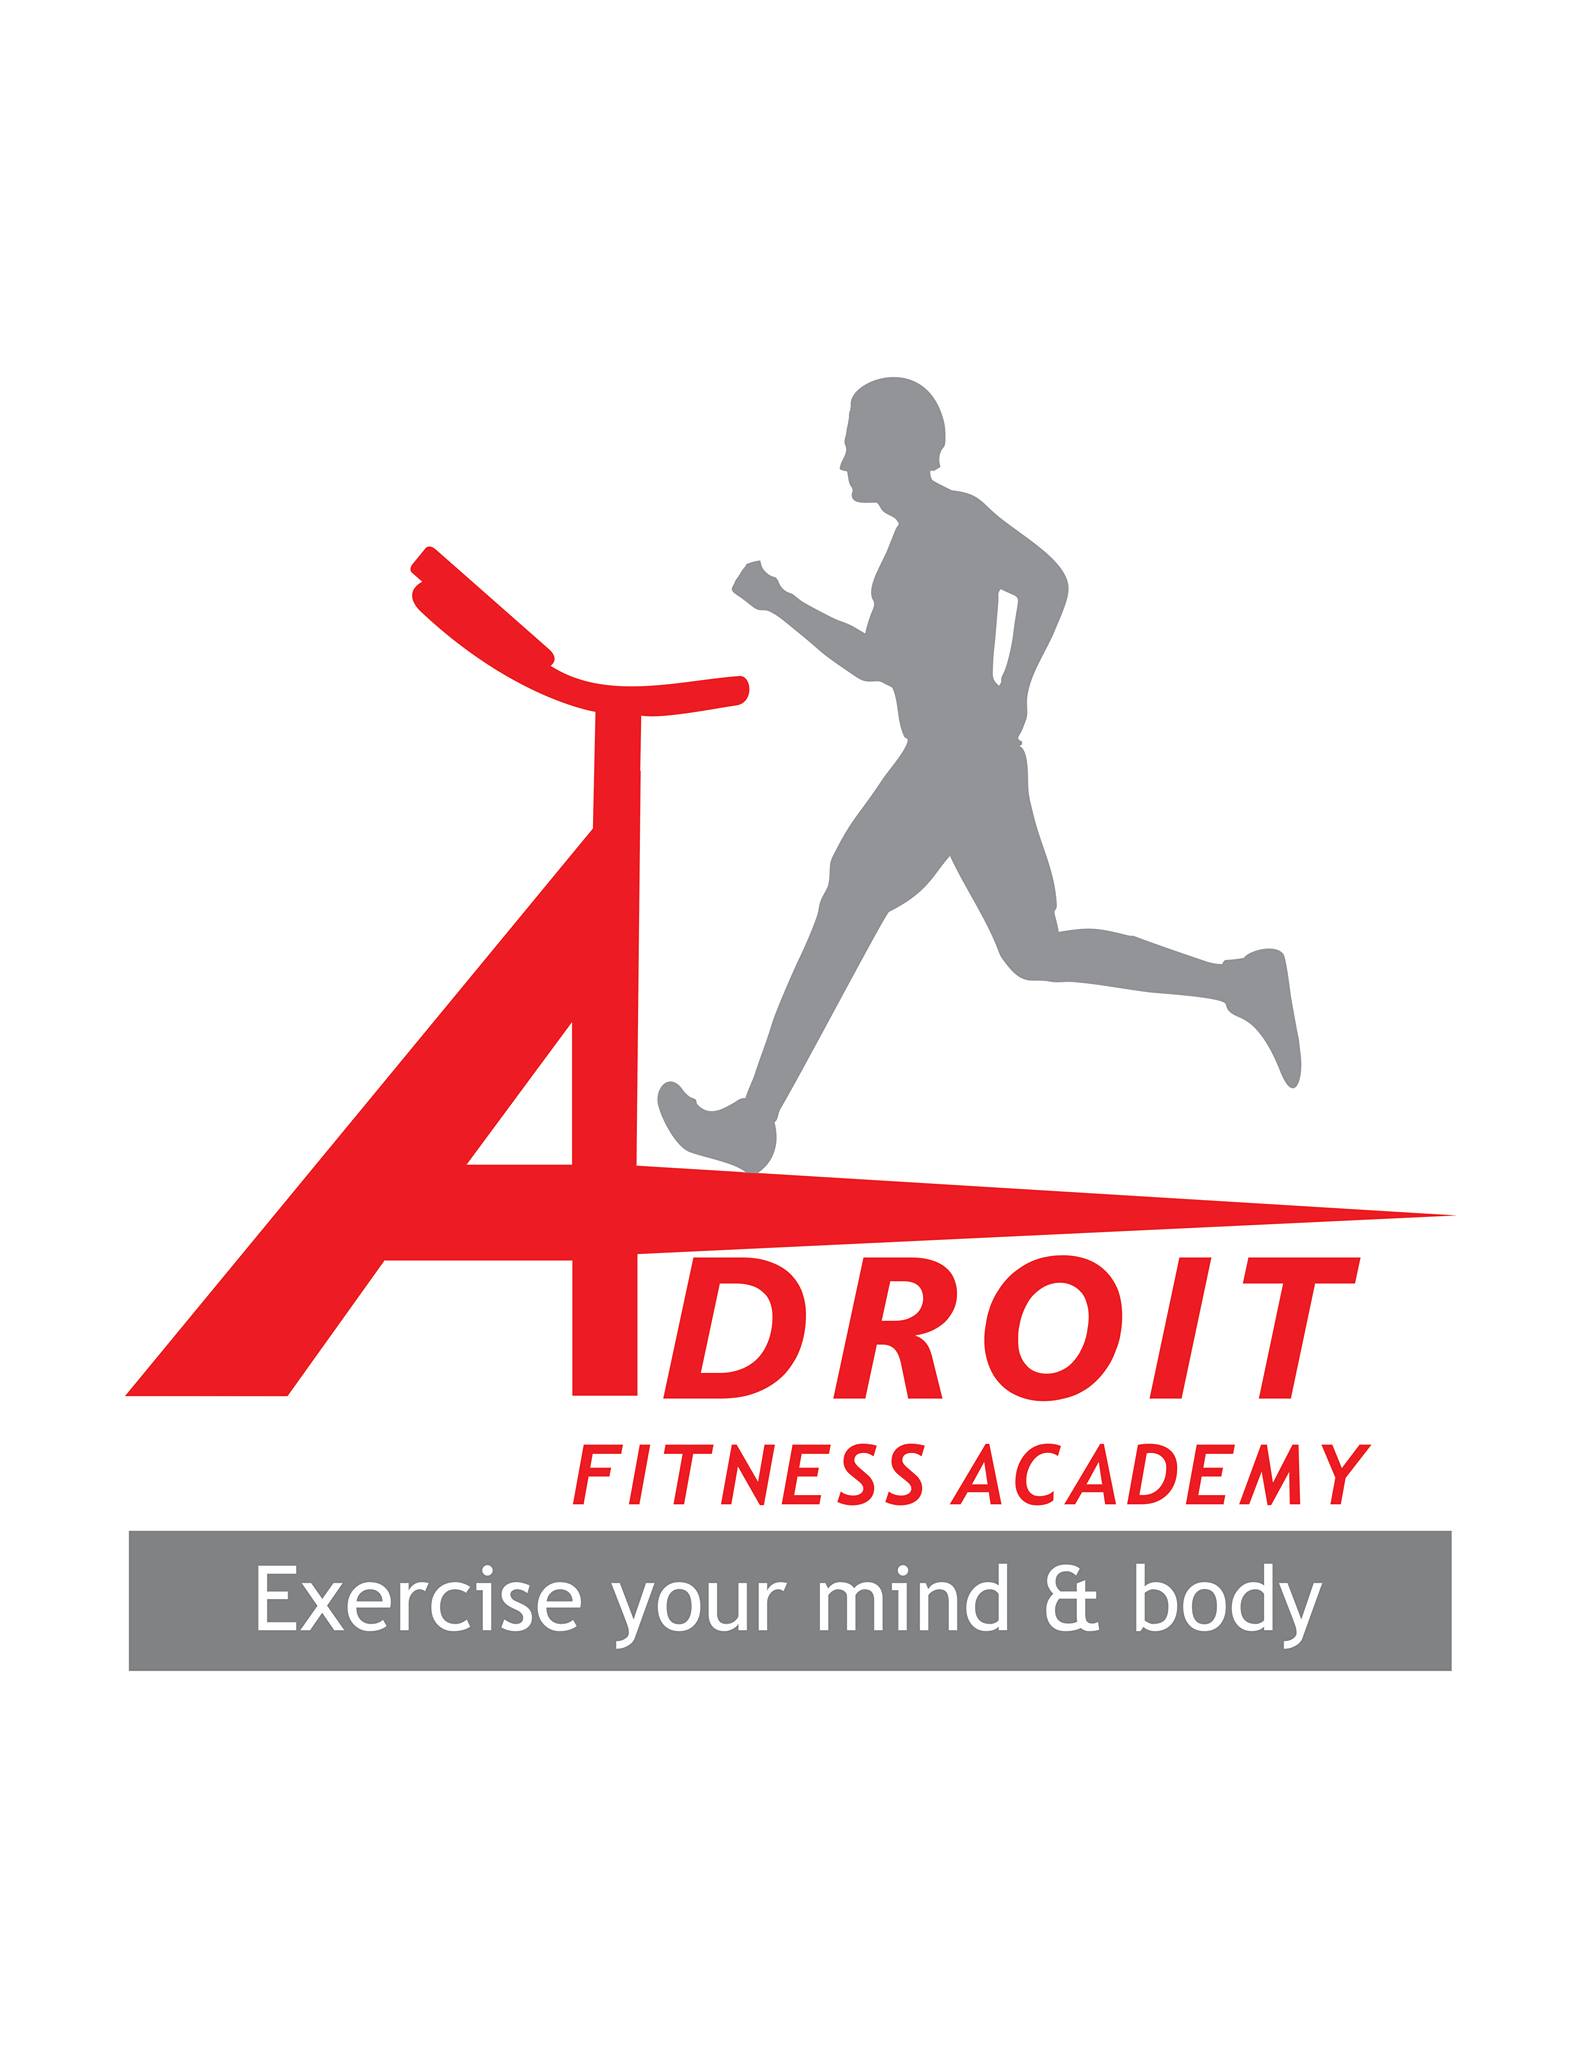 ADROIT FITNESS ACADEMY|Gym and Fitness Centre|Active Life